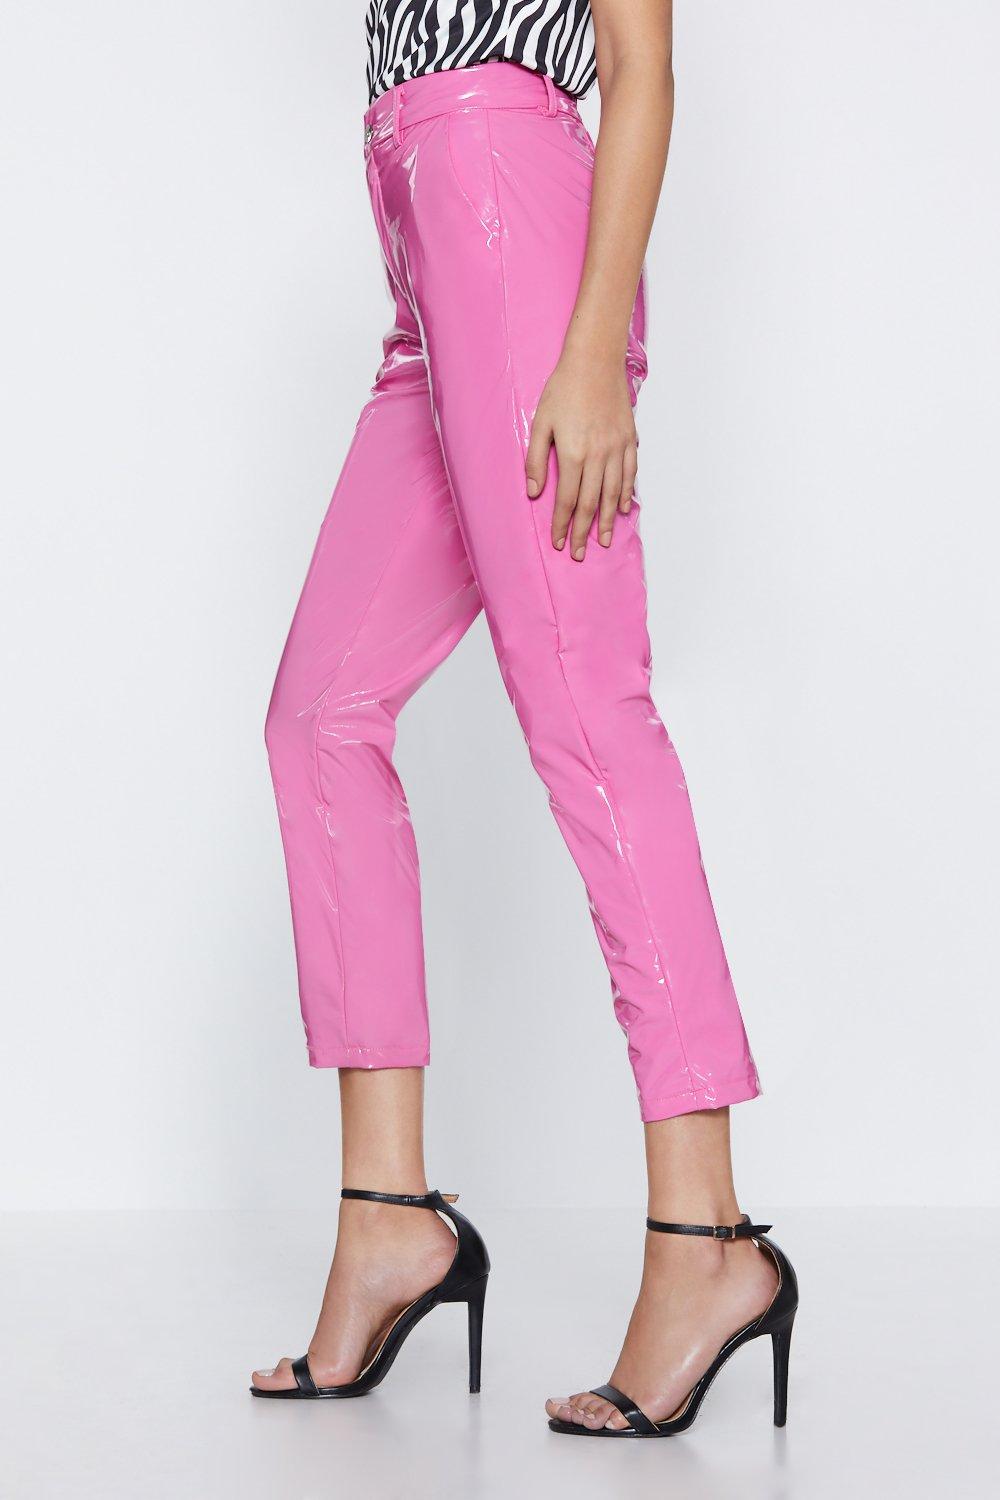 hot pink pleather pants